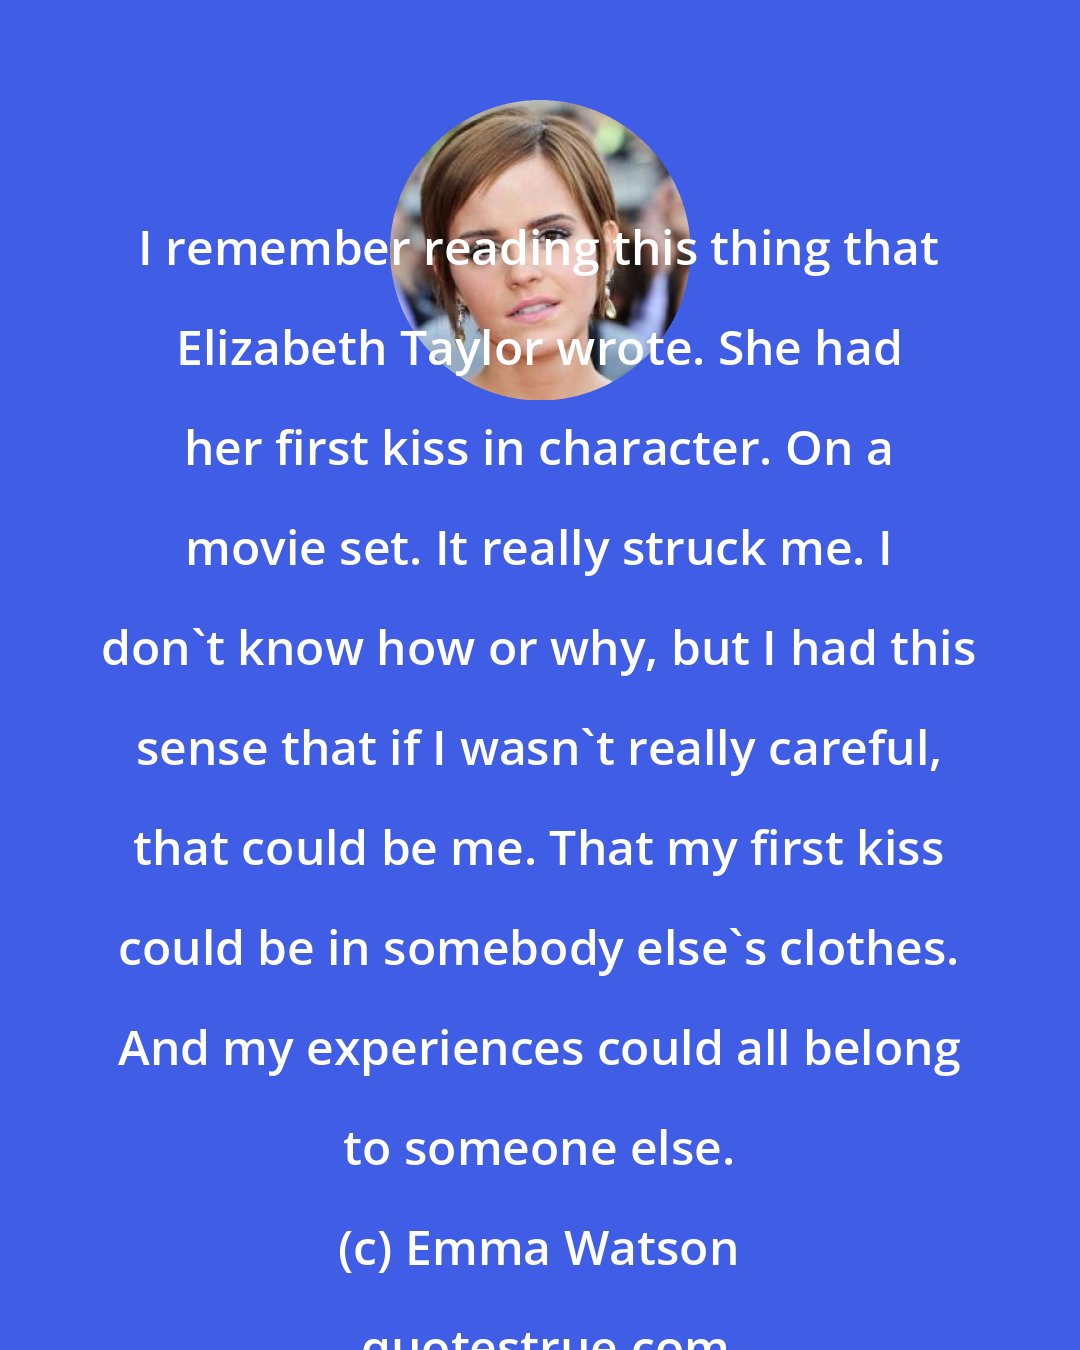 Emma Watson: I remember reading this thing that Elizabeth Taylor wrote. She had her first kiss in character. On a movie set. It really struck me. I don't know how or why, but I had this sense that if I wasn't really careful, that could be me. That my first kiss could be in somebody else's clothes. And my experiences could all belong to someone else.